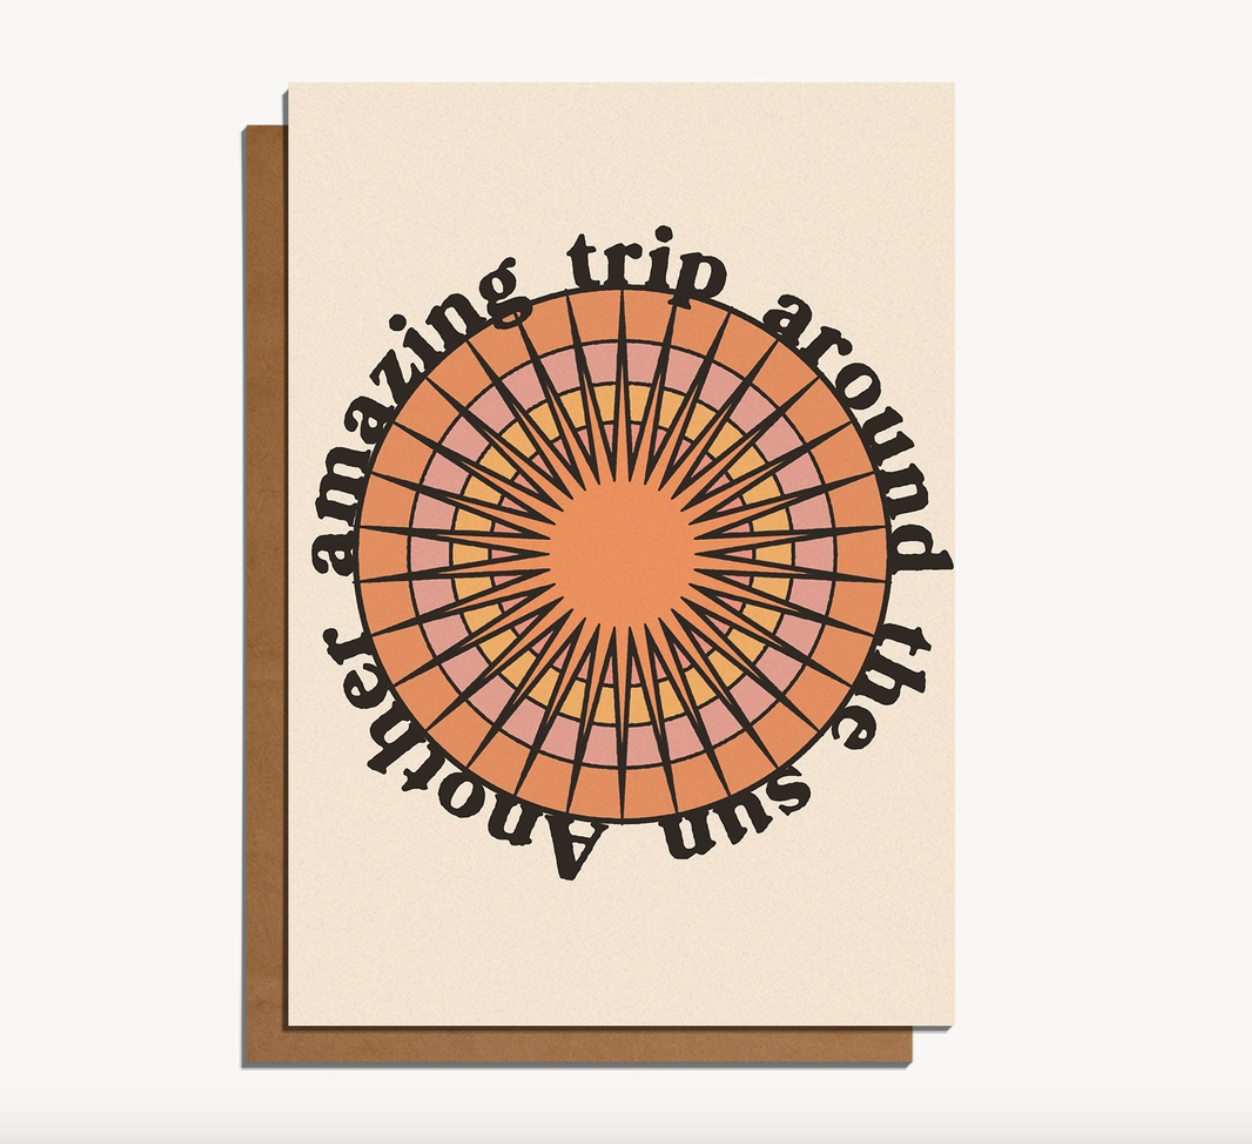 another amazing trip around the sun card